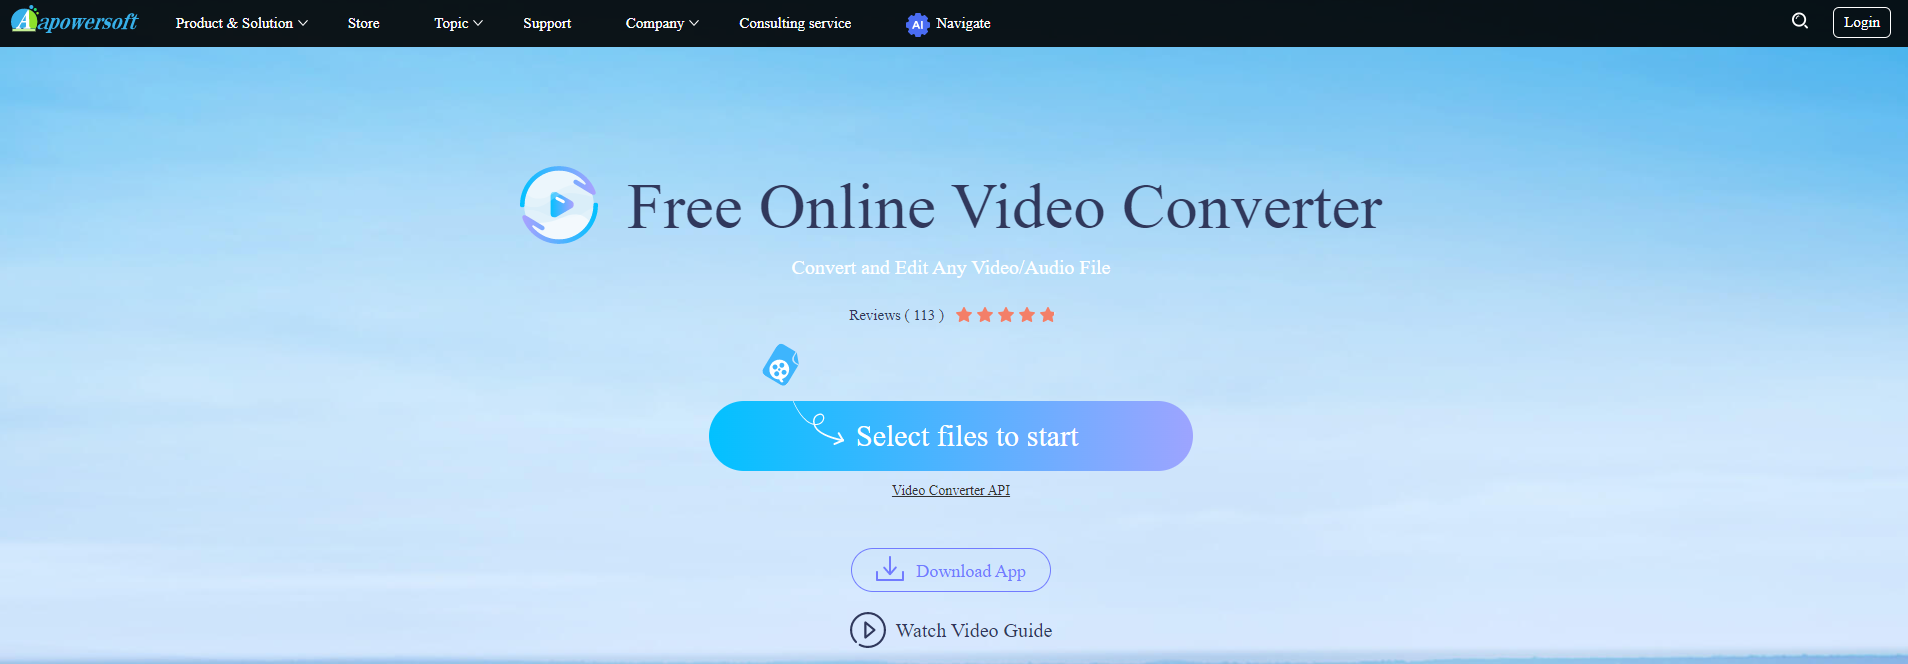 Secure and Reliable Sites to Convert YouTube Videos to MP3